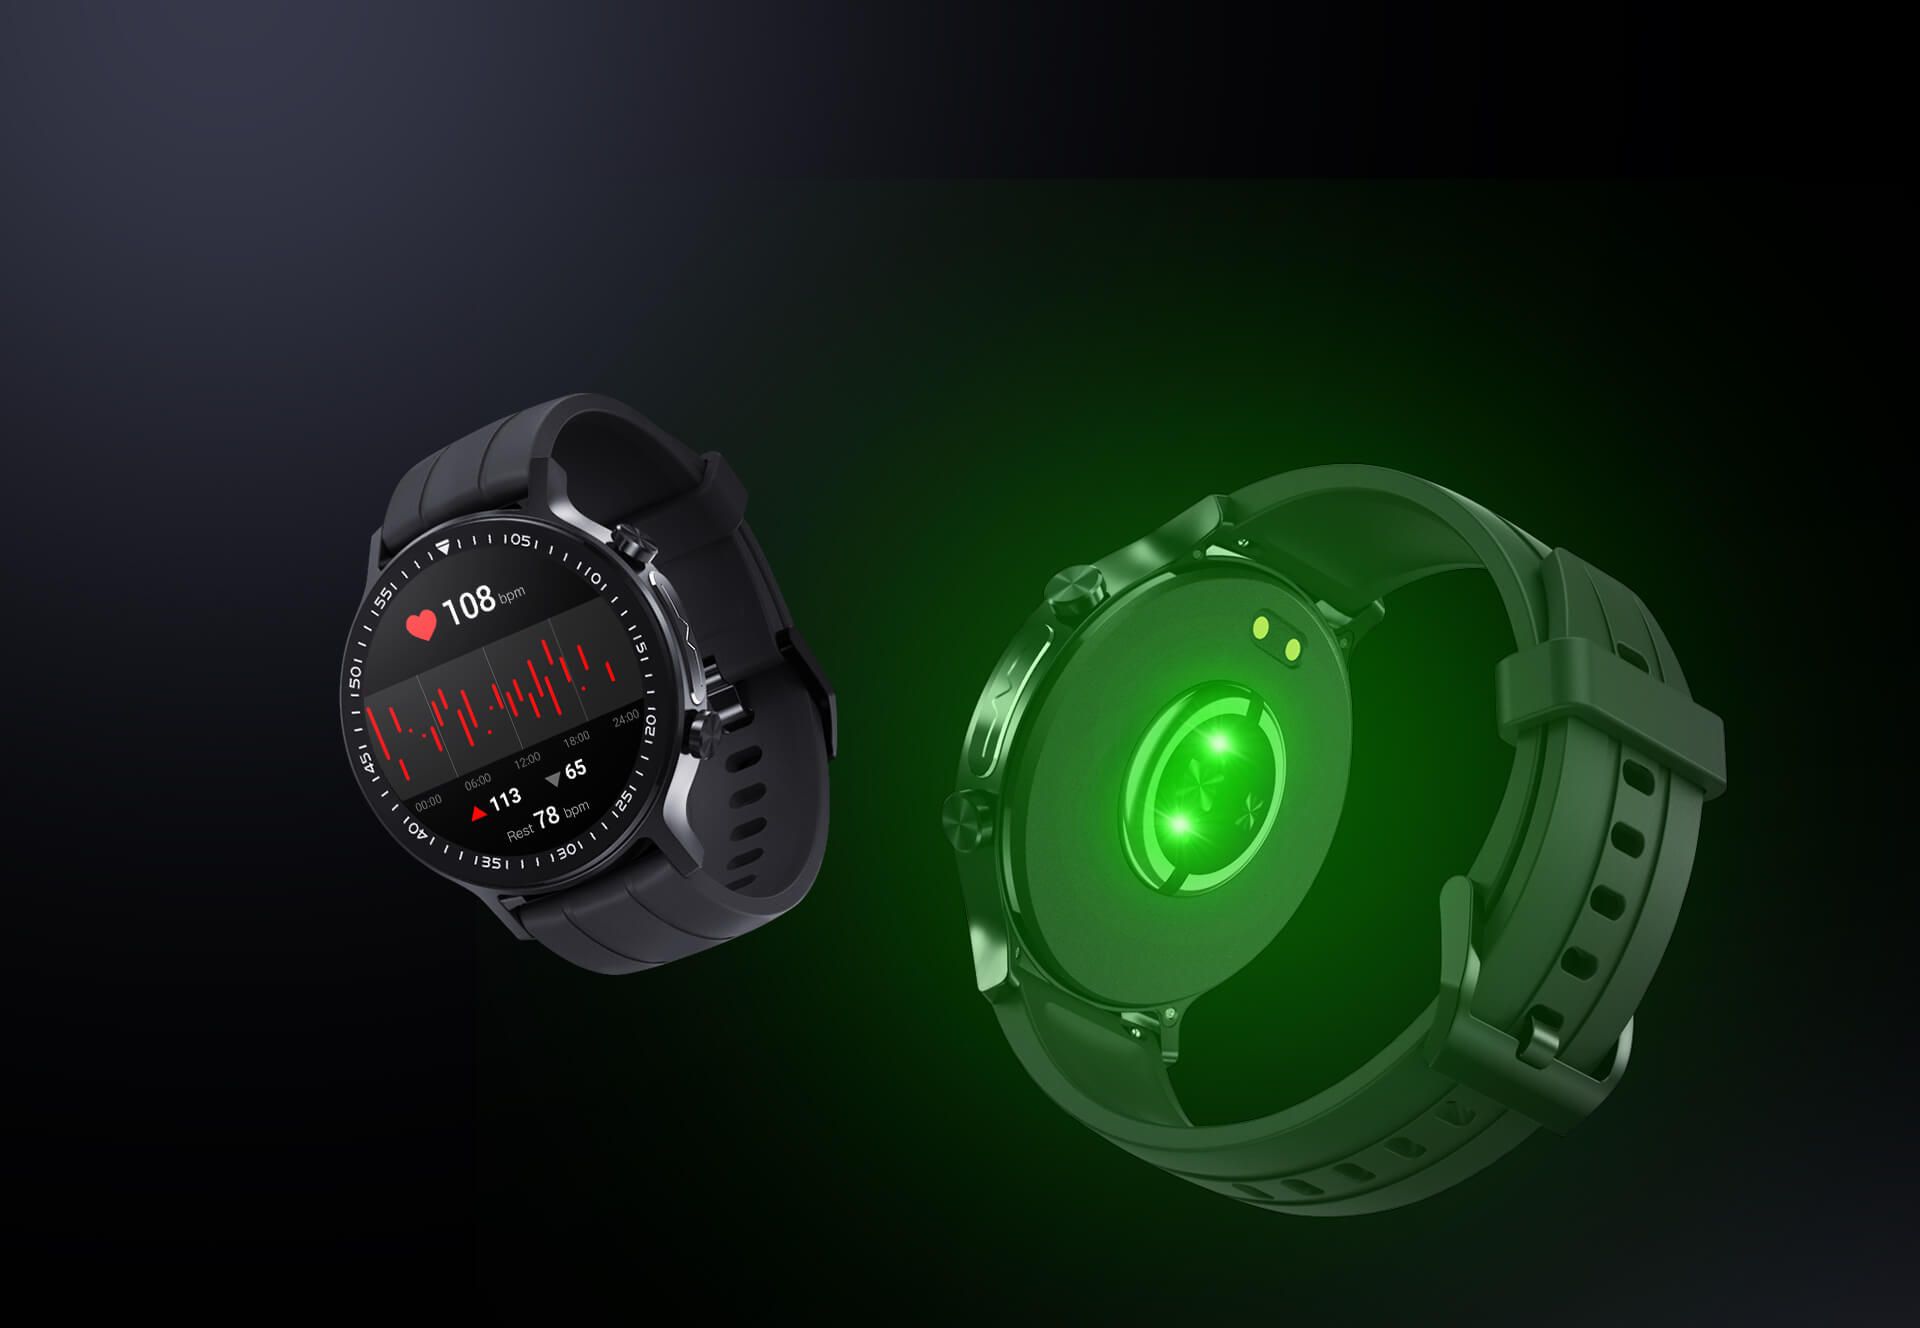 24-hour Heart Rate Monitoring <br>The Future of Health is on Your Wrist